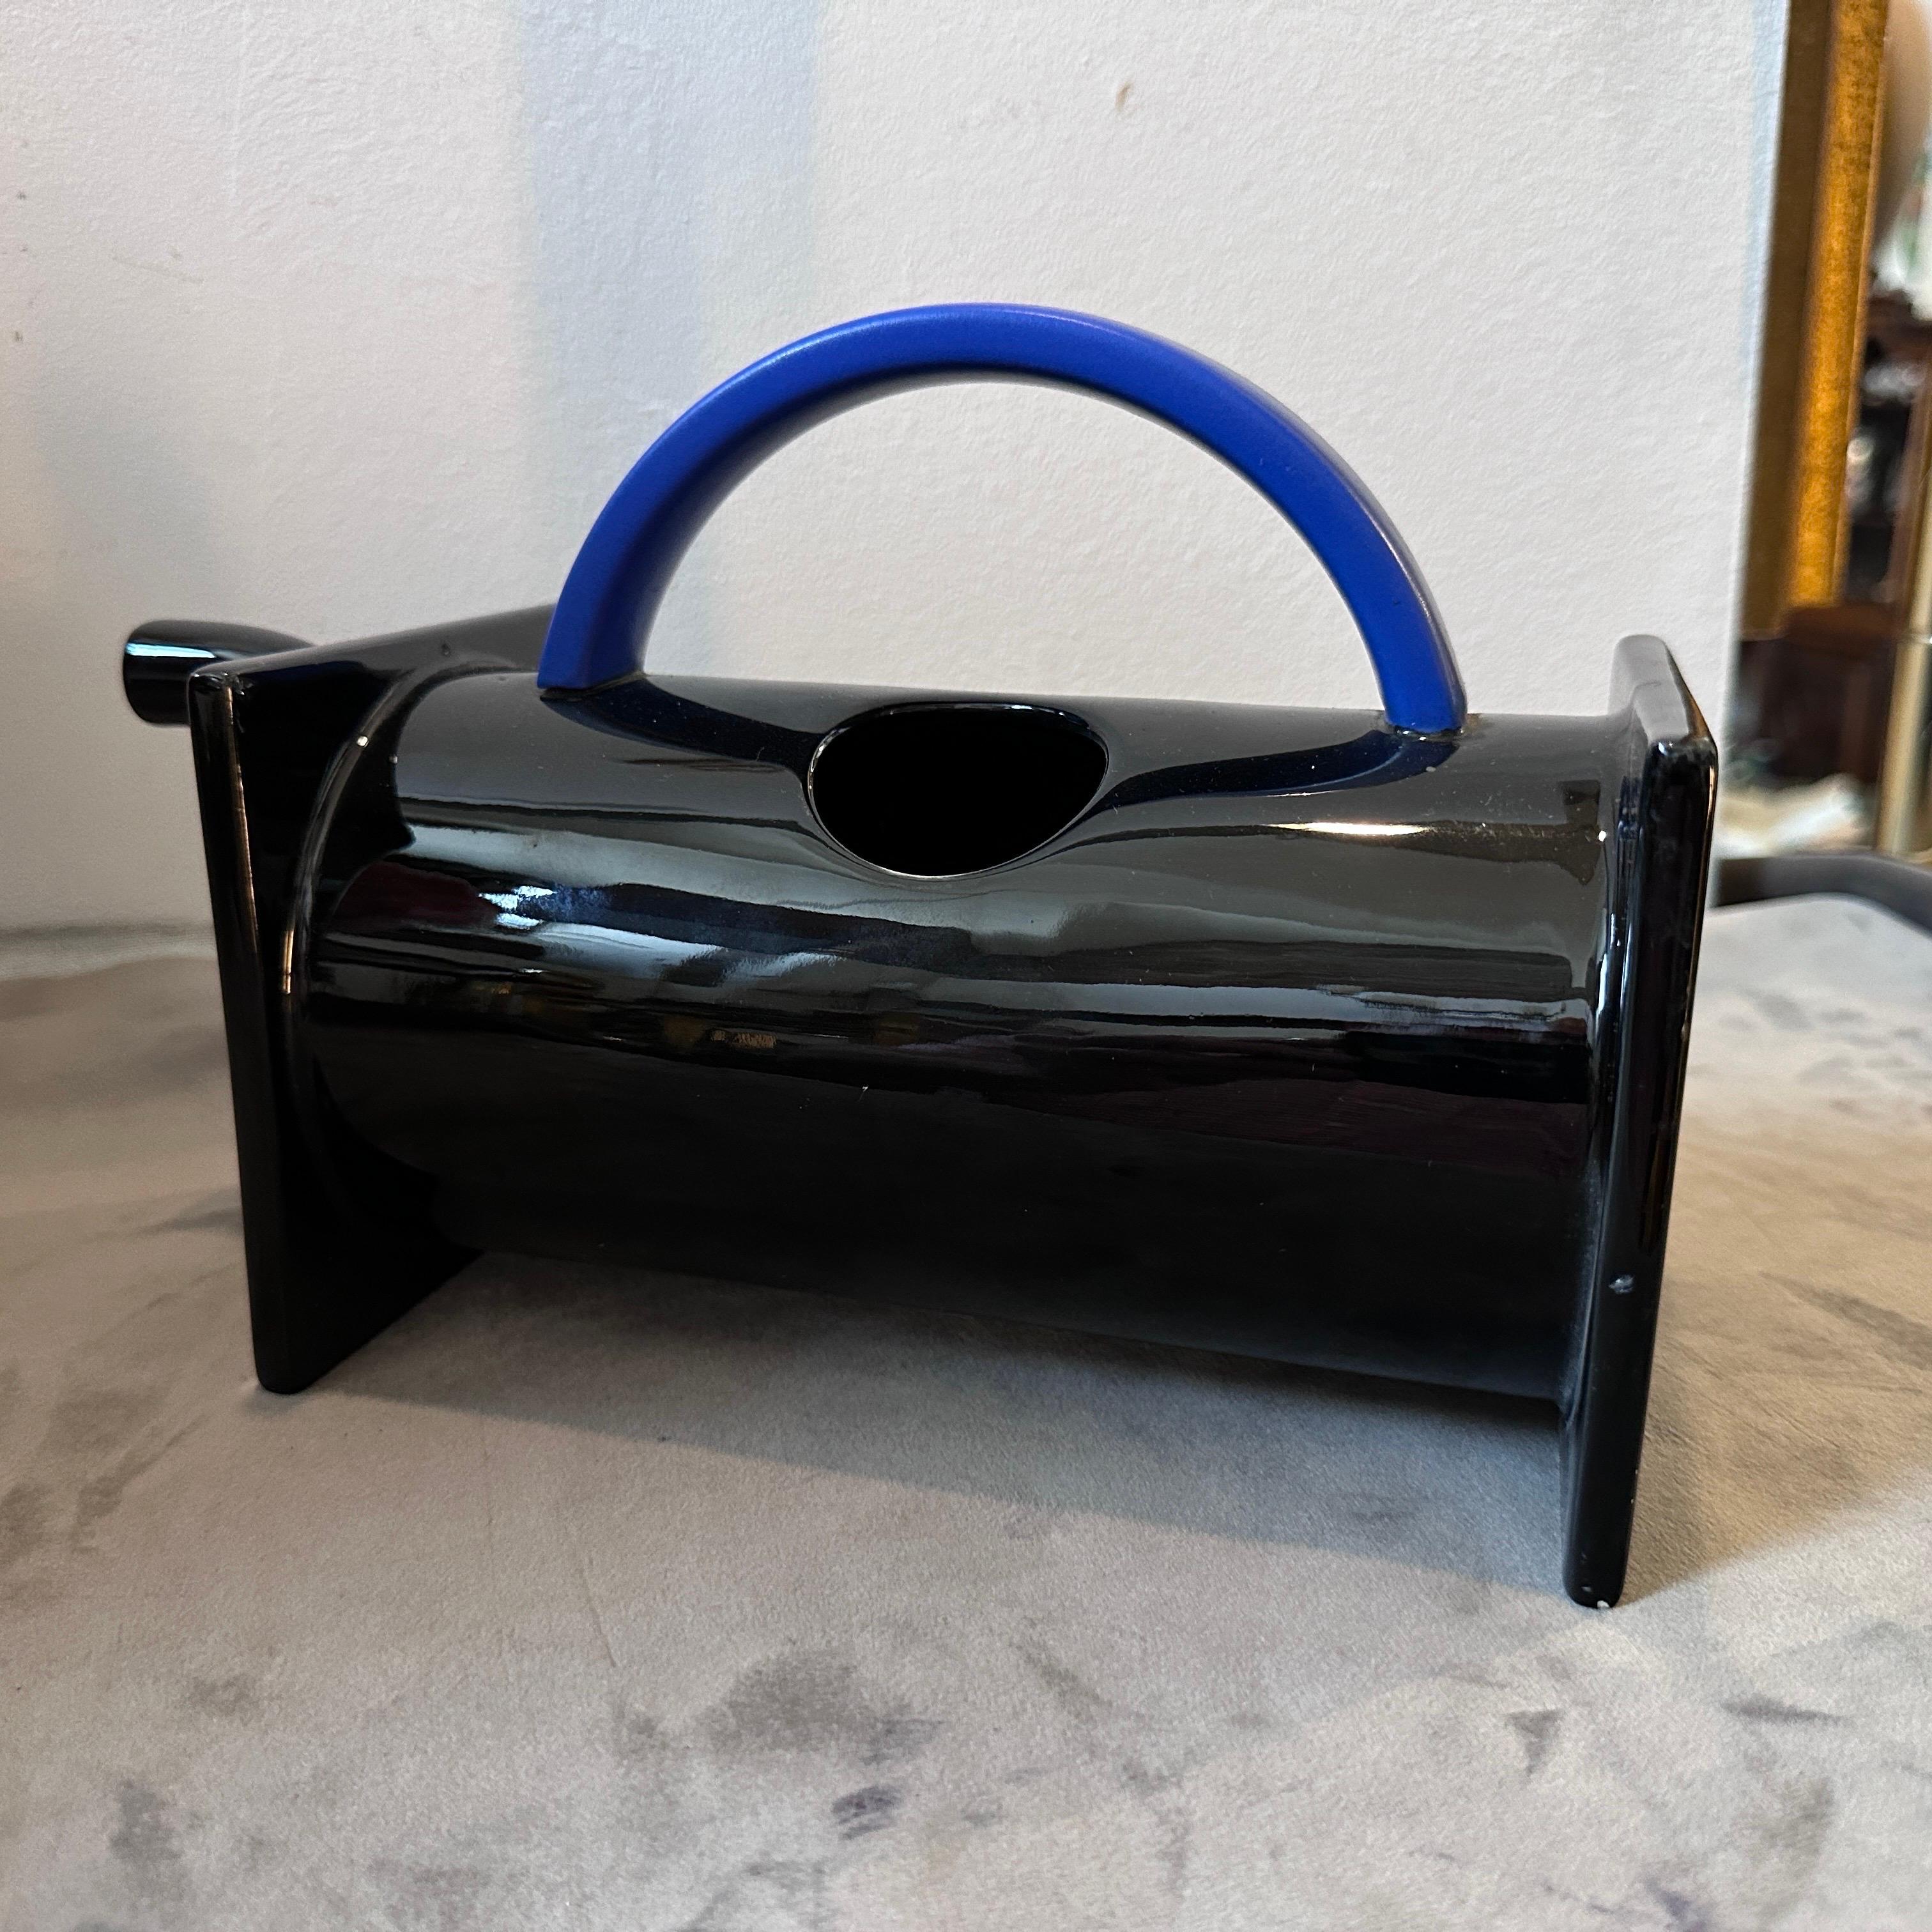 A Memphis Milano black and blue ceramic tea pot designed by Marco Zanini for Bitossi in perfect conditions. The tea pot by Marco Zanini is a stunning piece of functional art. It embodies the iconic style of the Memphis Group, known for its bold